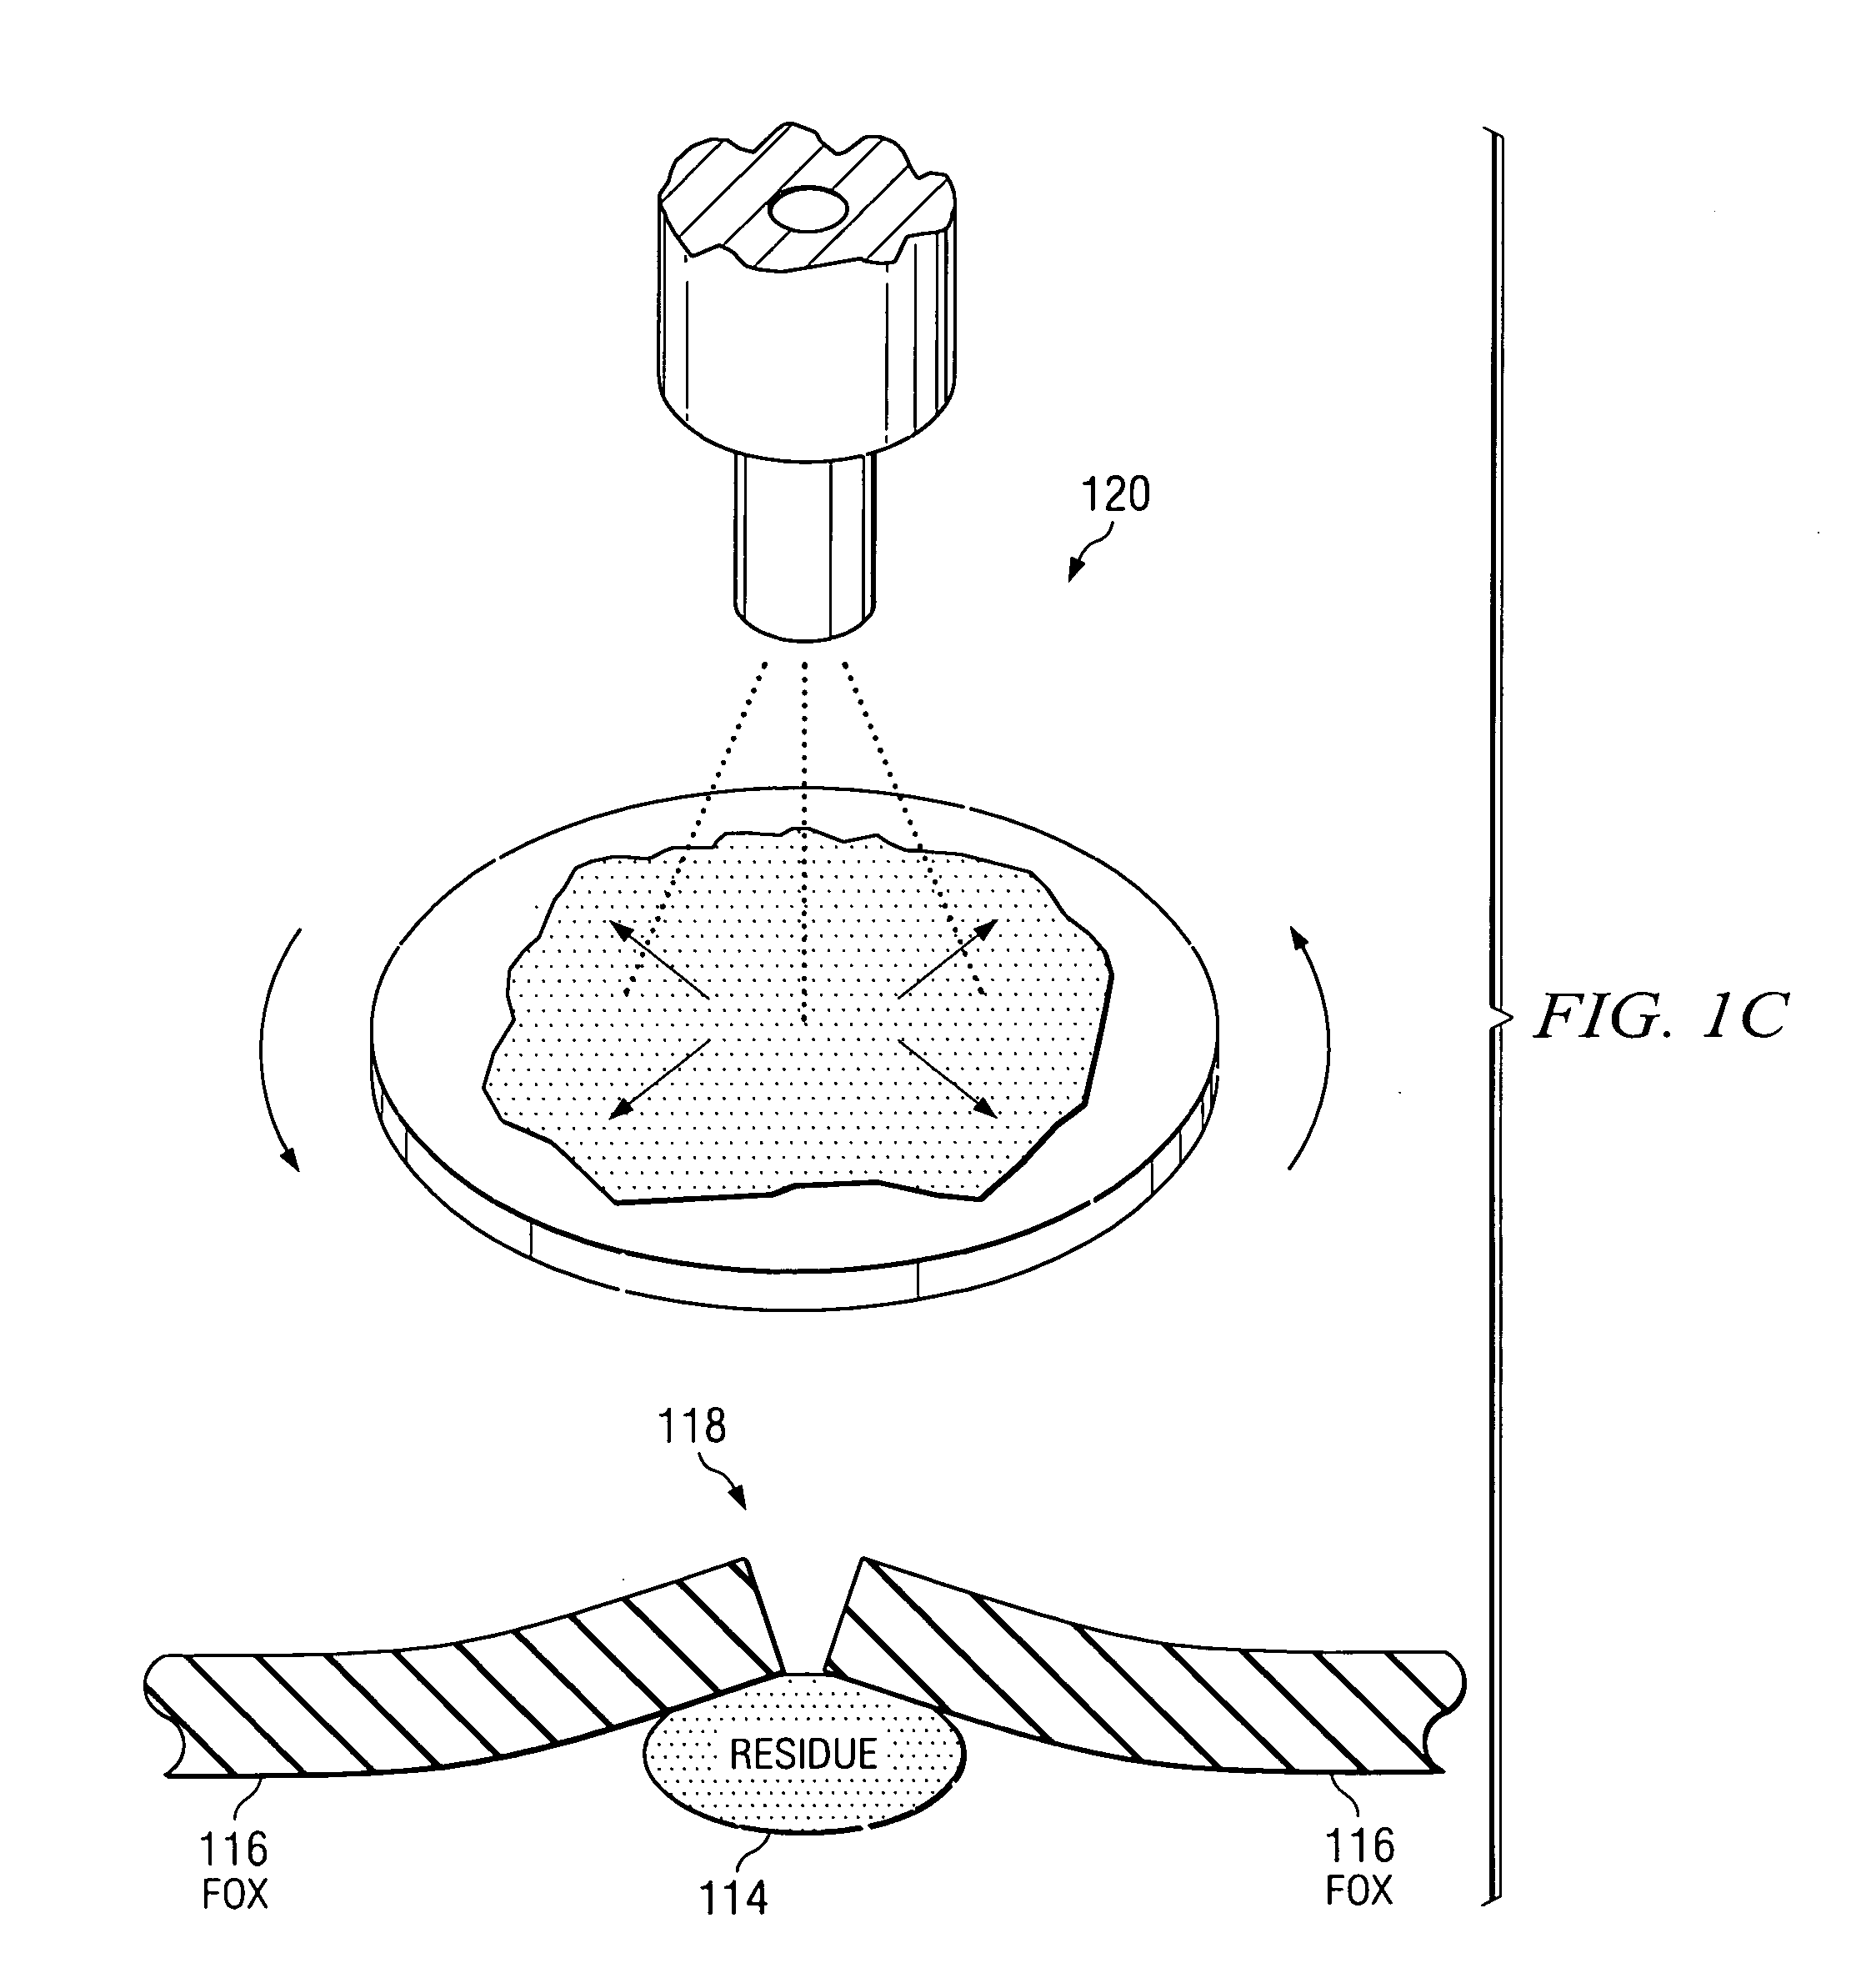 Set associative repair cache systems and methods